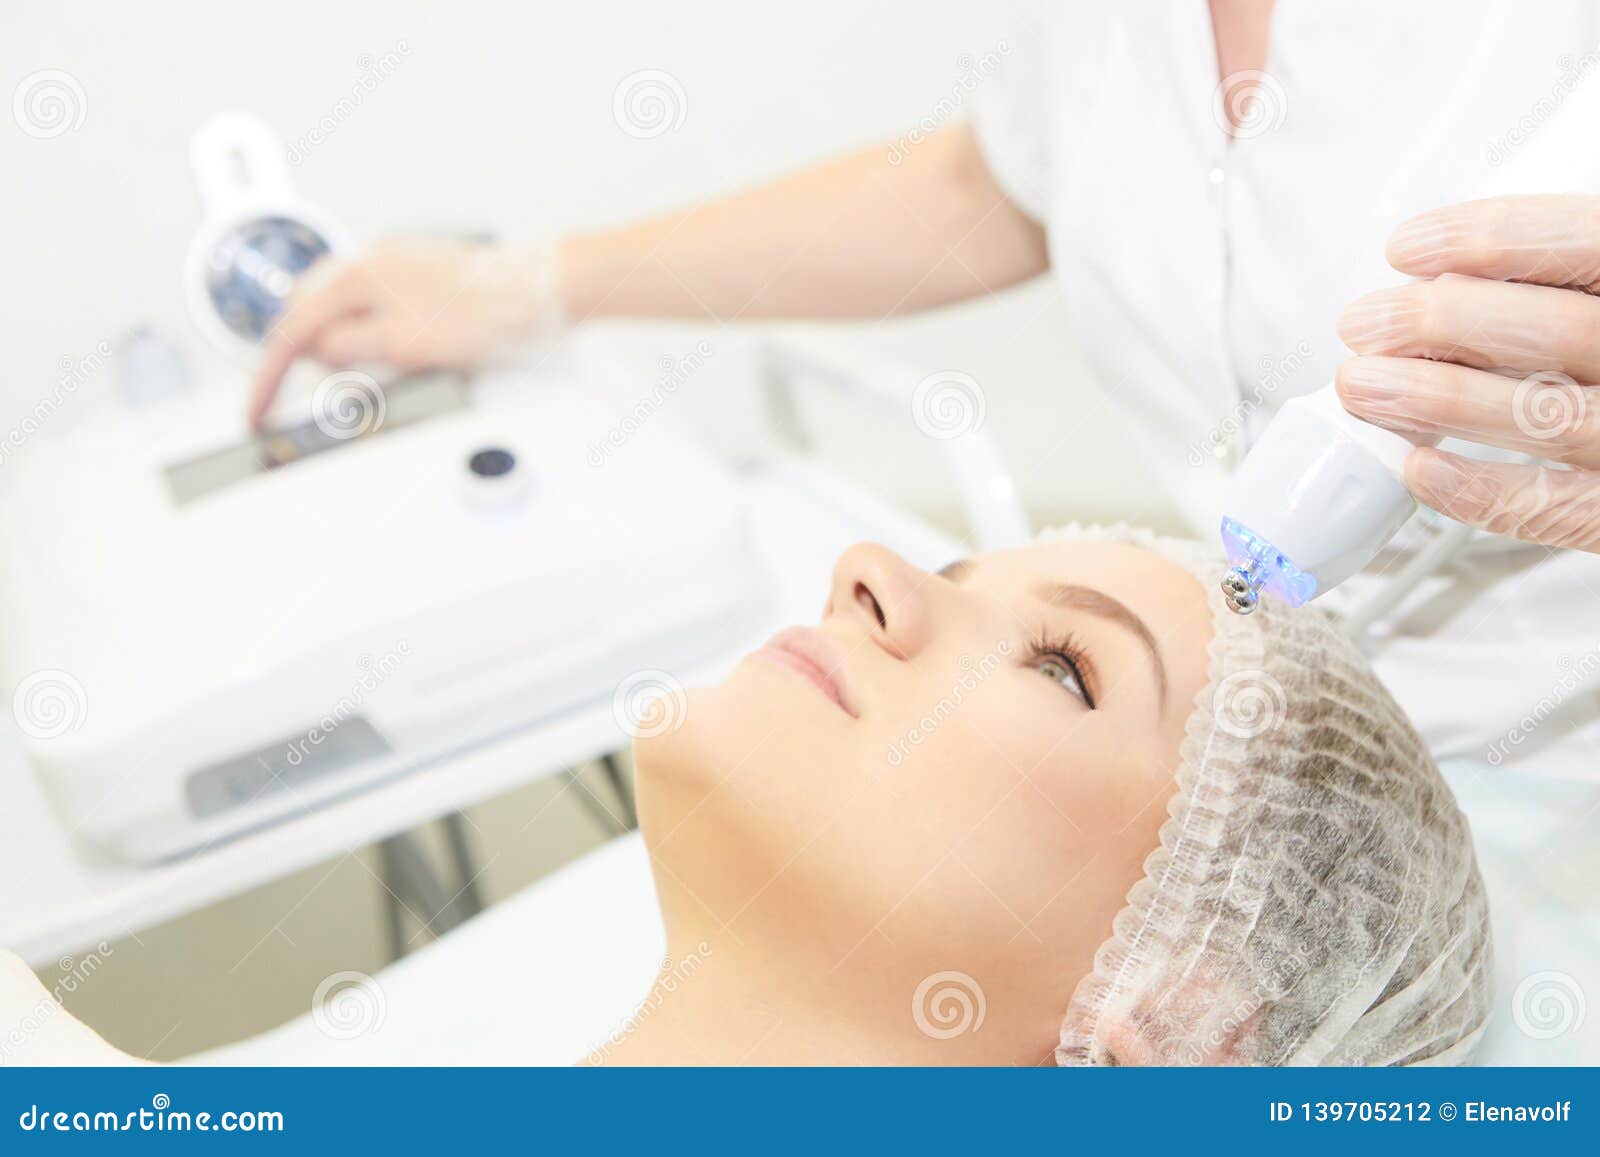 microcurrent facial dermatology procedure. model. aesthetic radiofrequency treatment. micro current cosmetology massage